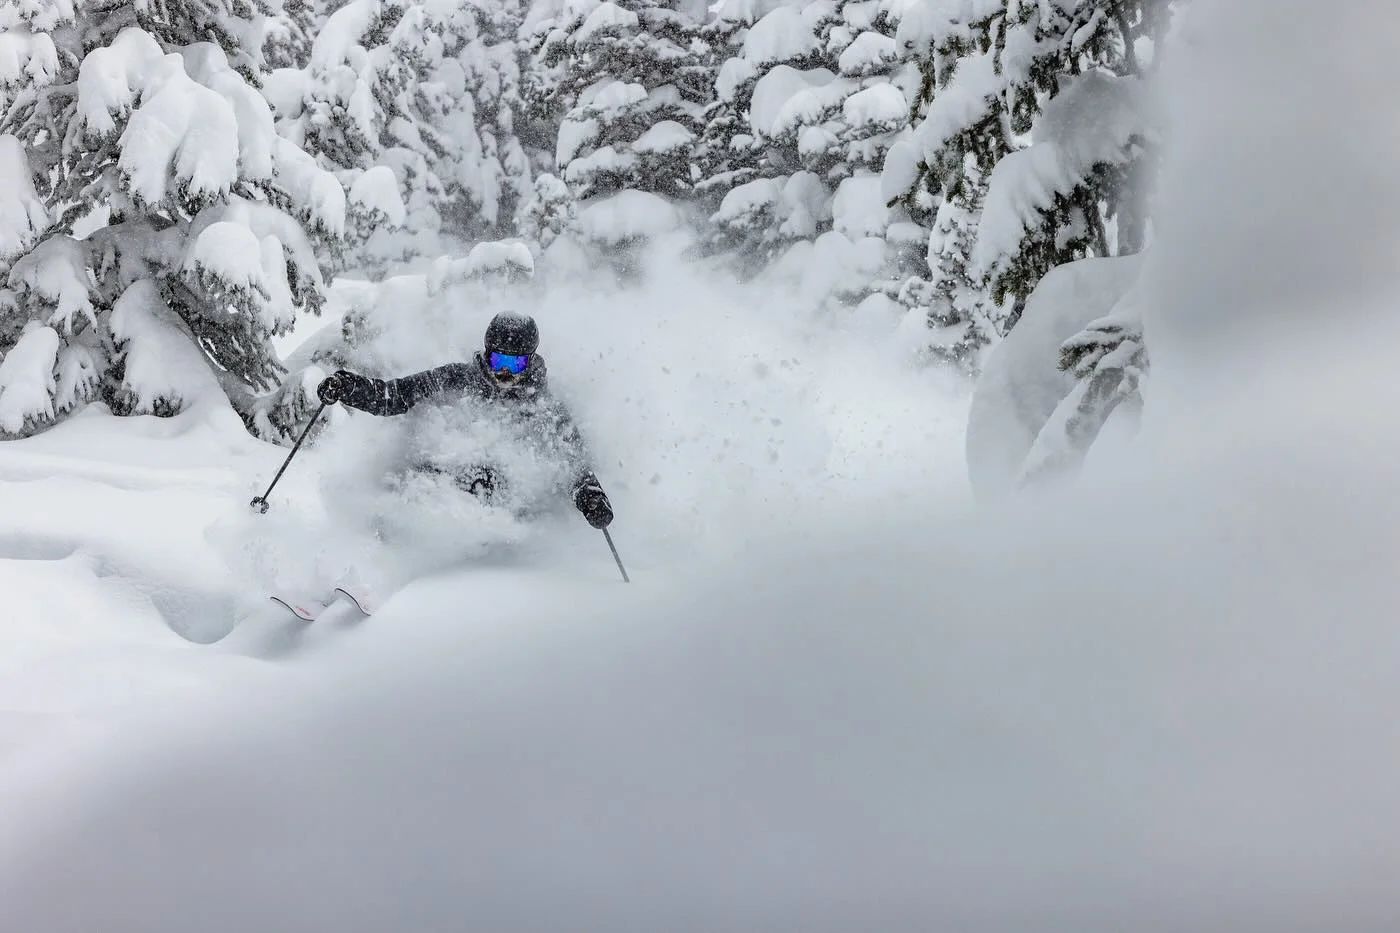 a skier with a snow-filled bear skis beautiful deep snow in the alpine